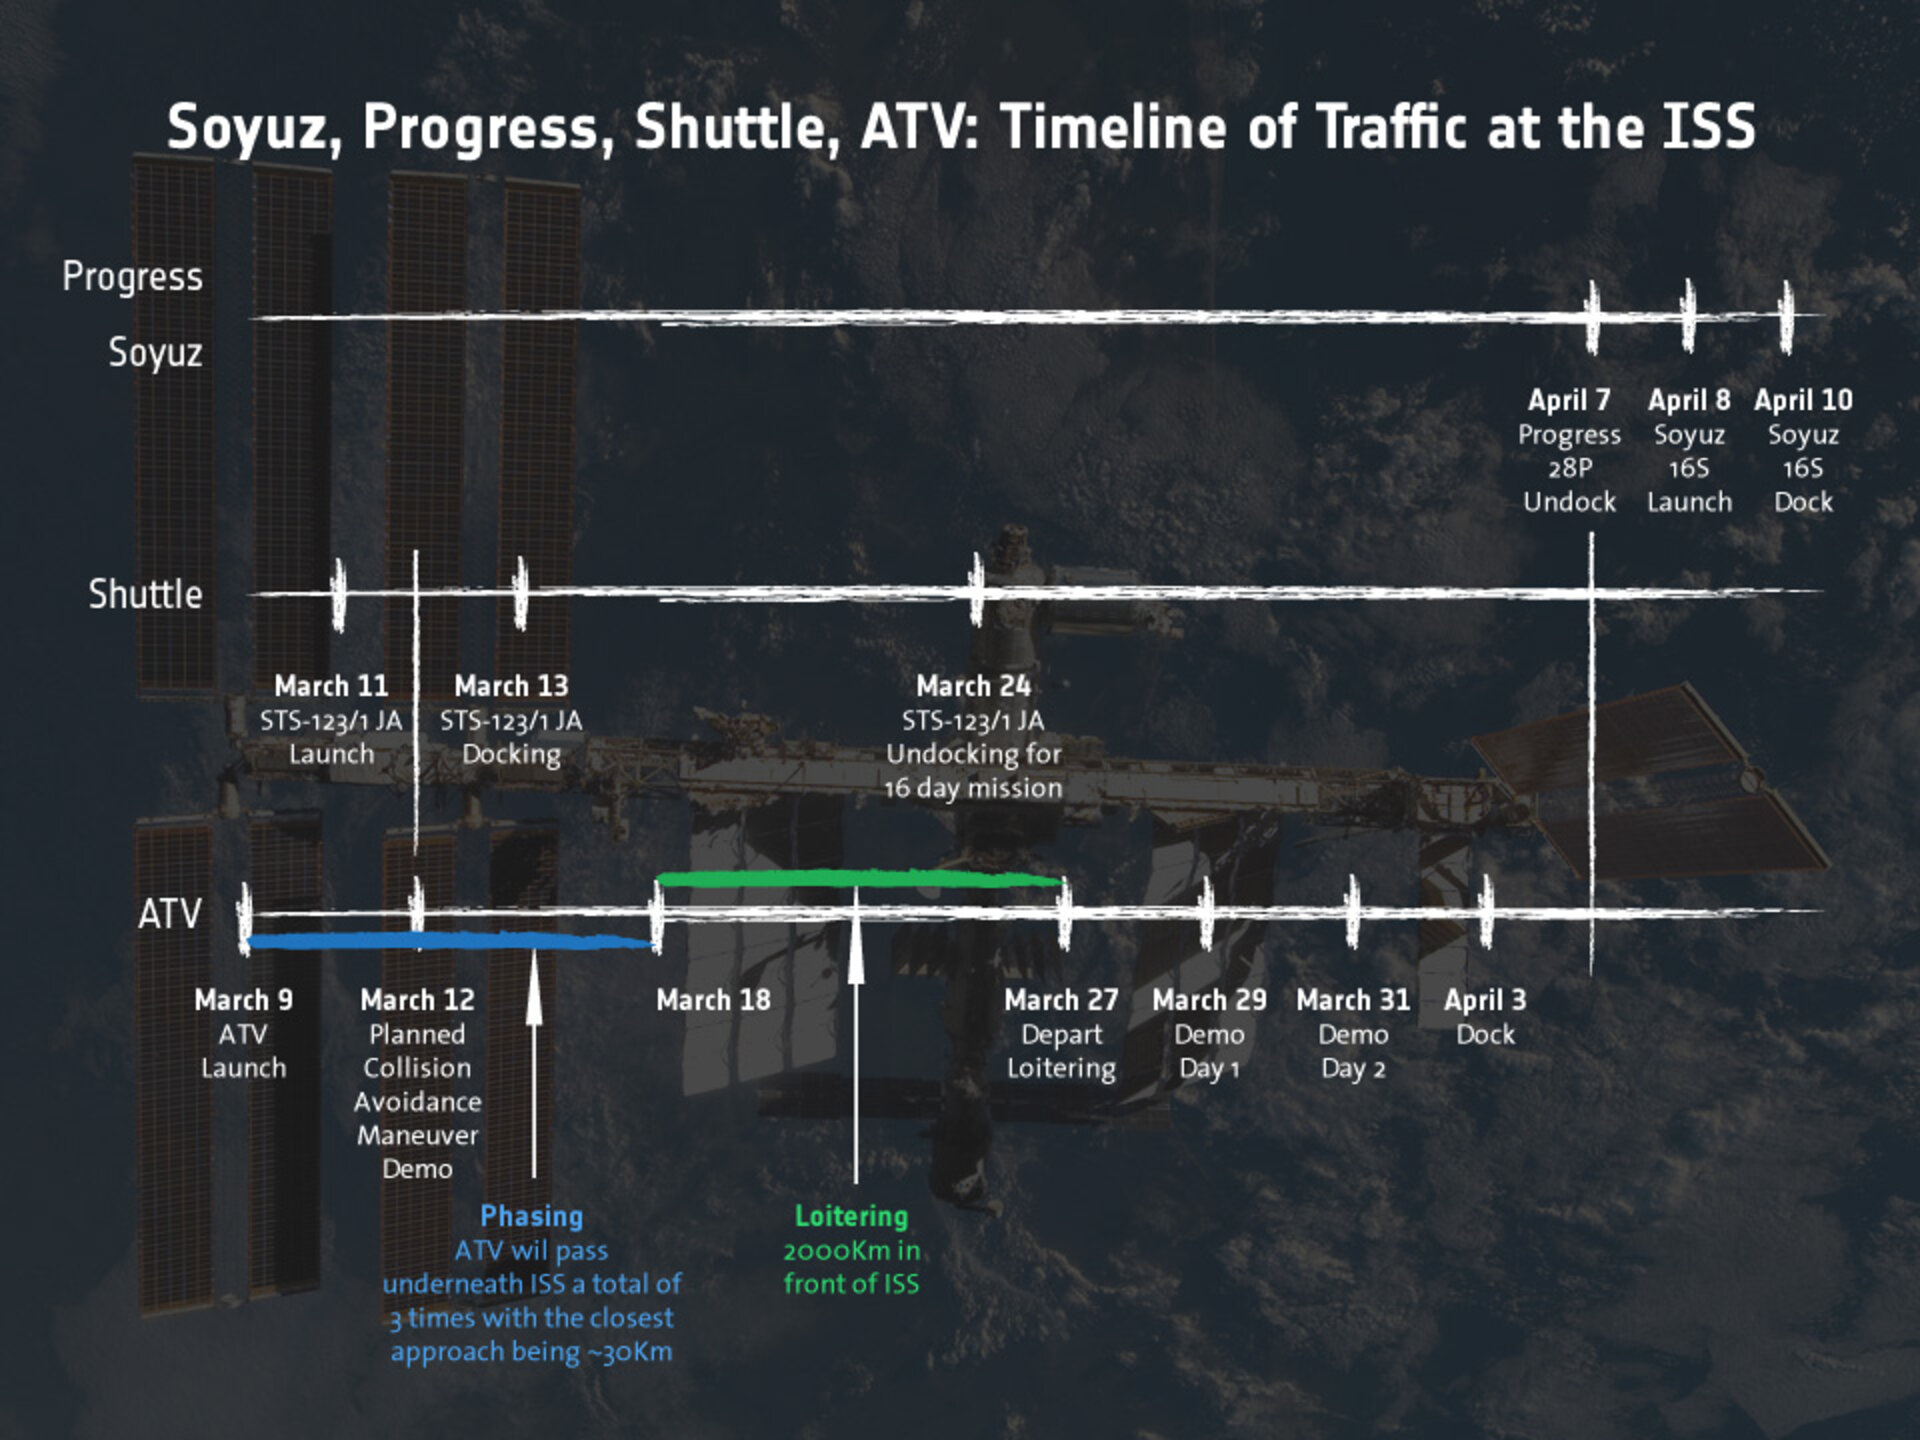 Traffic jam in space: timeline of vessels arriving at ISS (click for larger version)